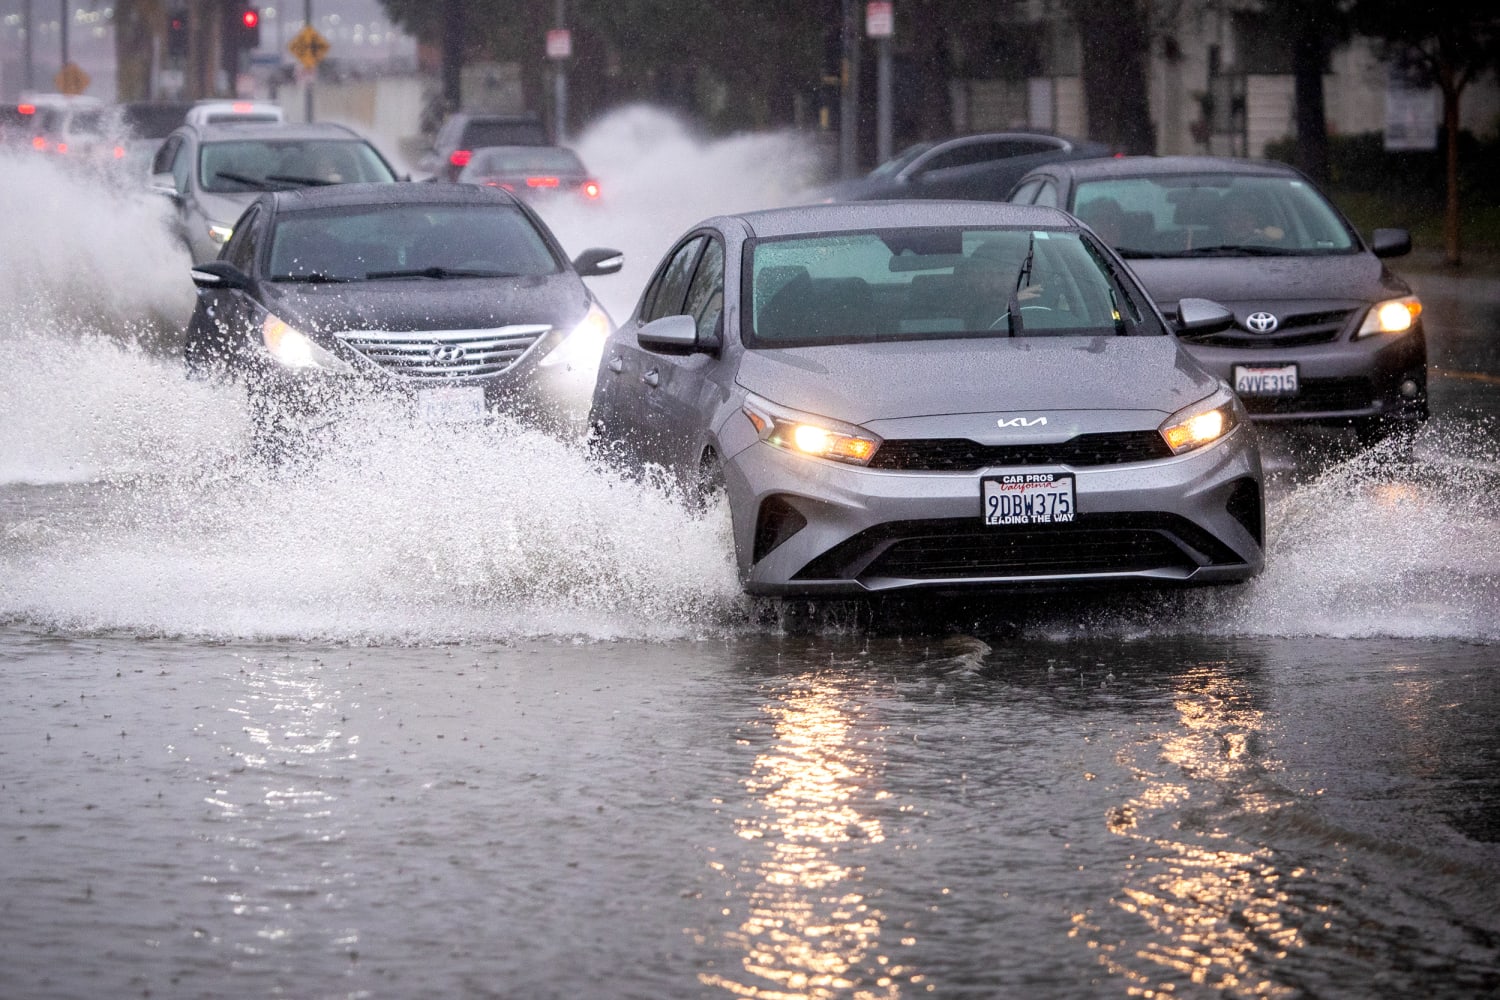 The view of El Niño as a product of California’s historic storms may be outdated